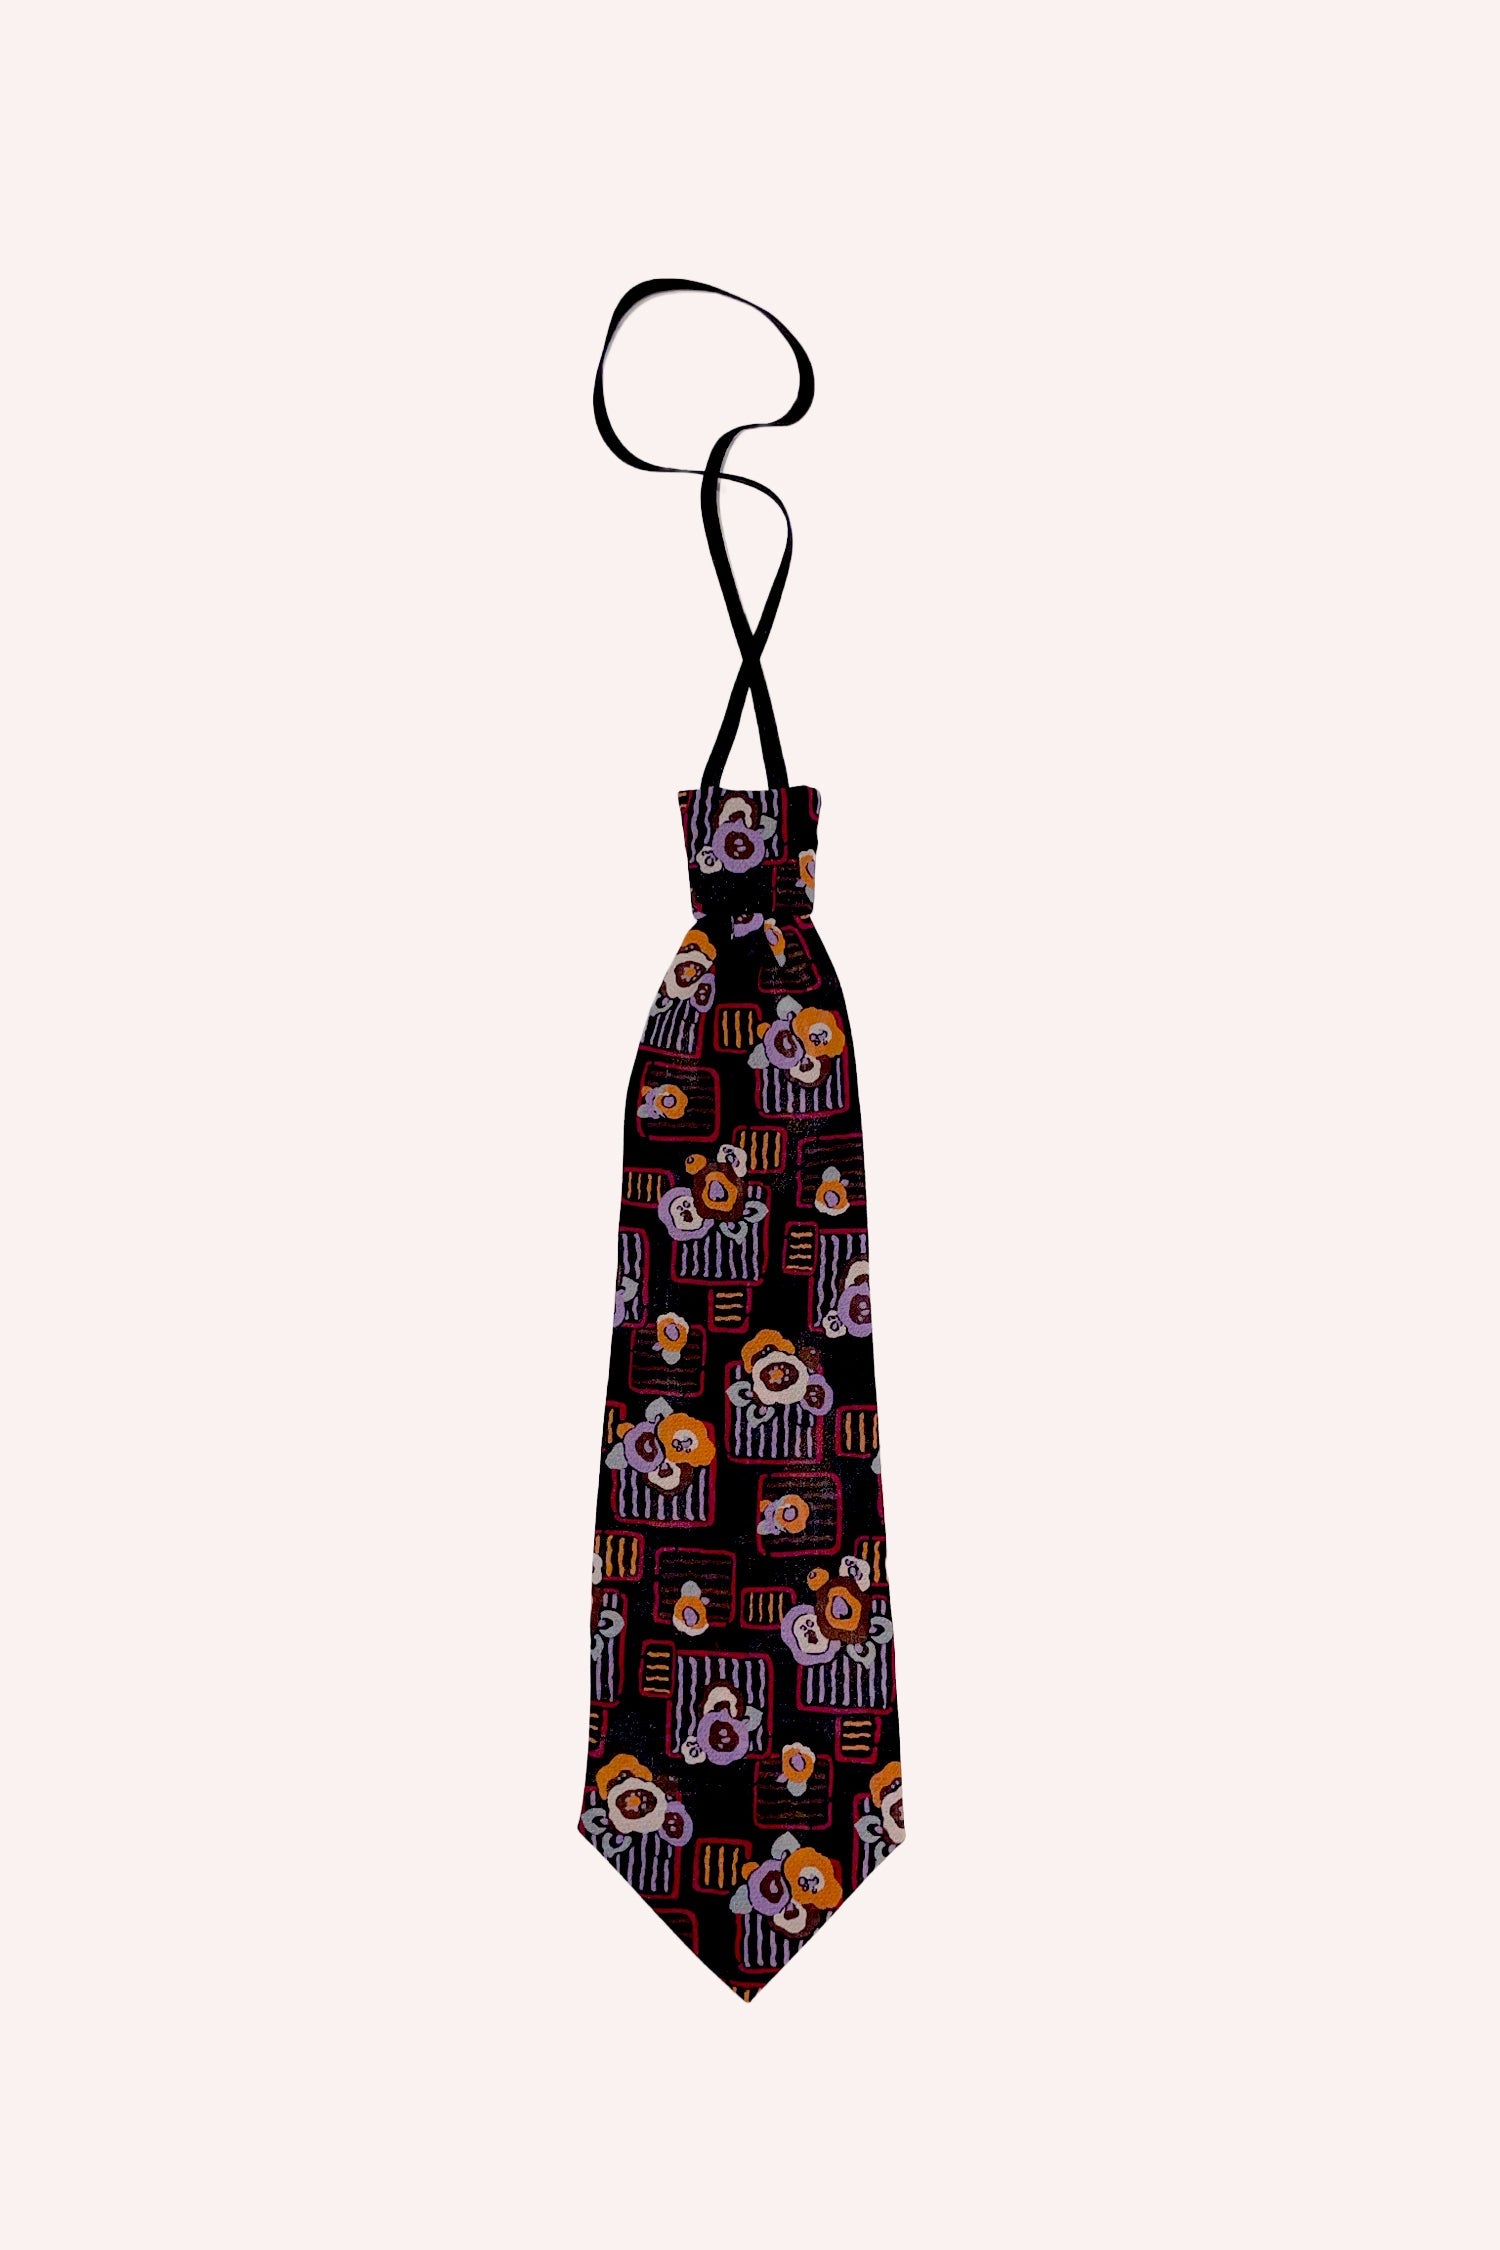 Deco Floral Patch Tie Orange, brown background, strap go around the neck, end in triangle shape